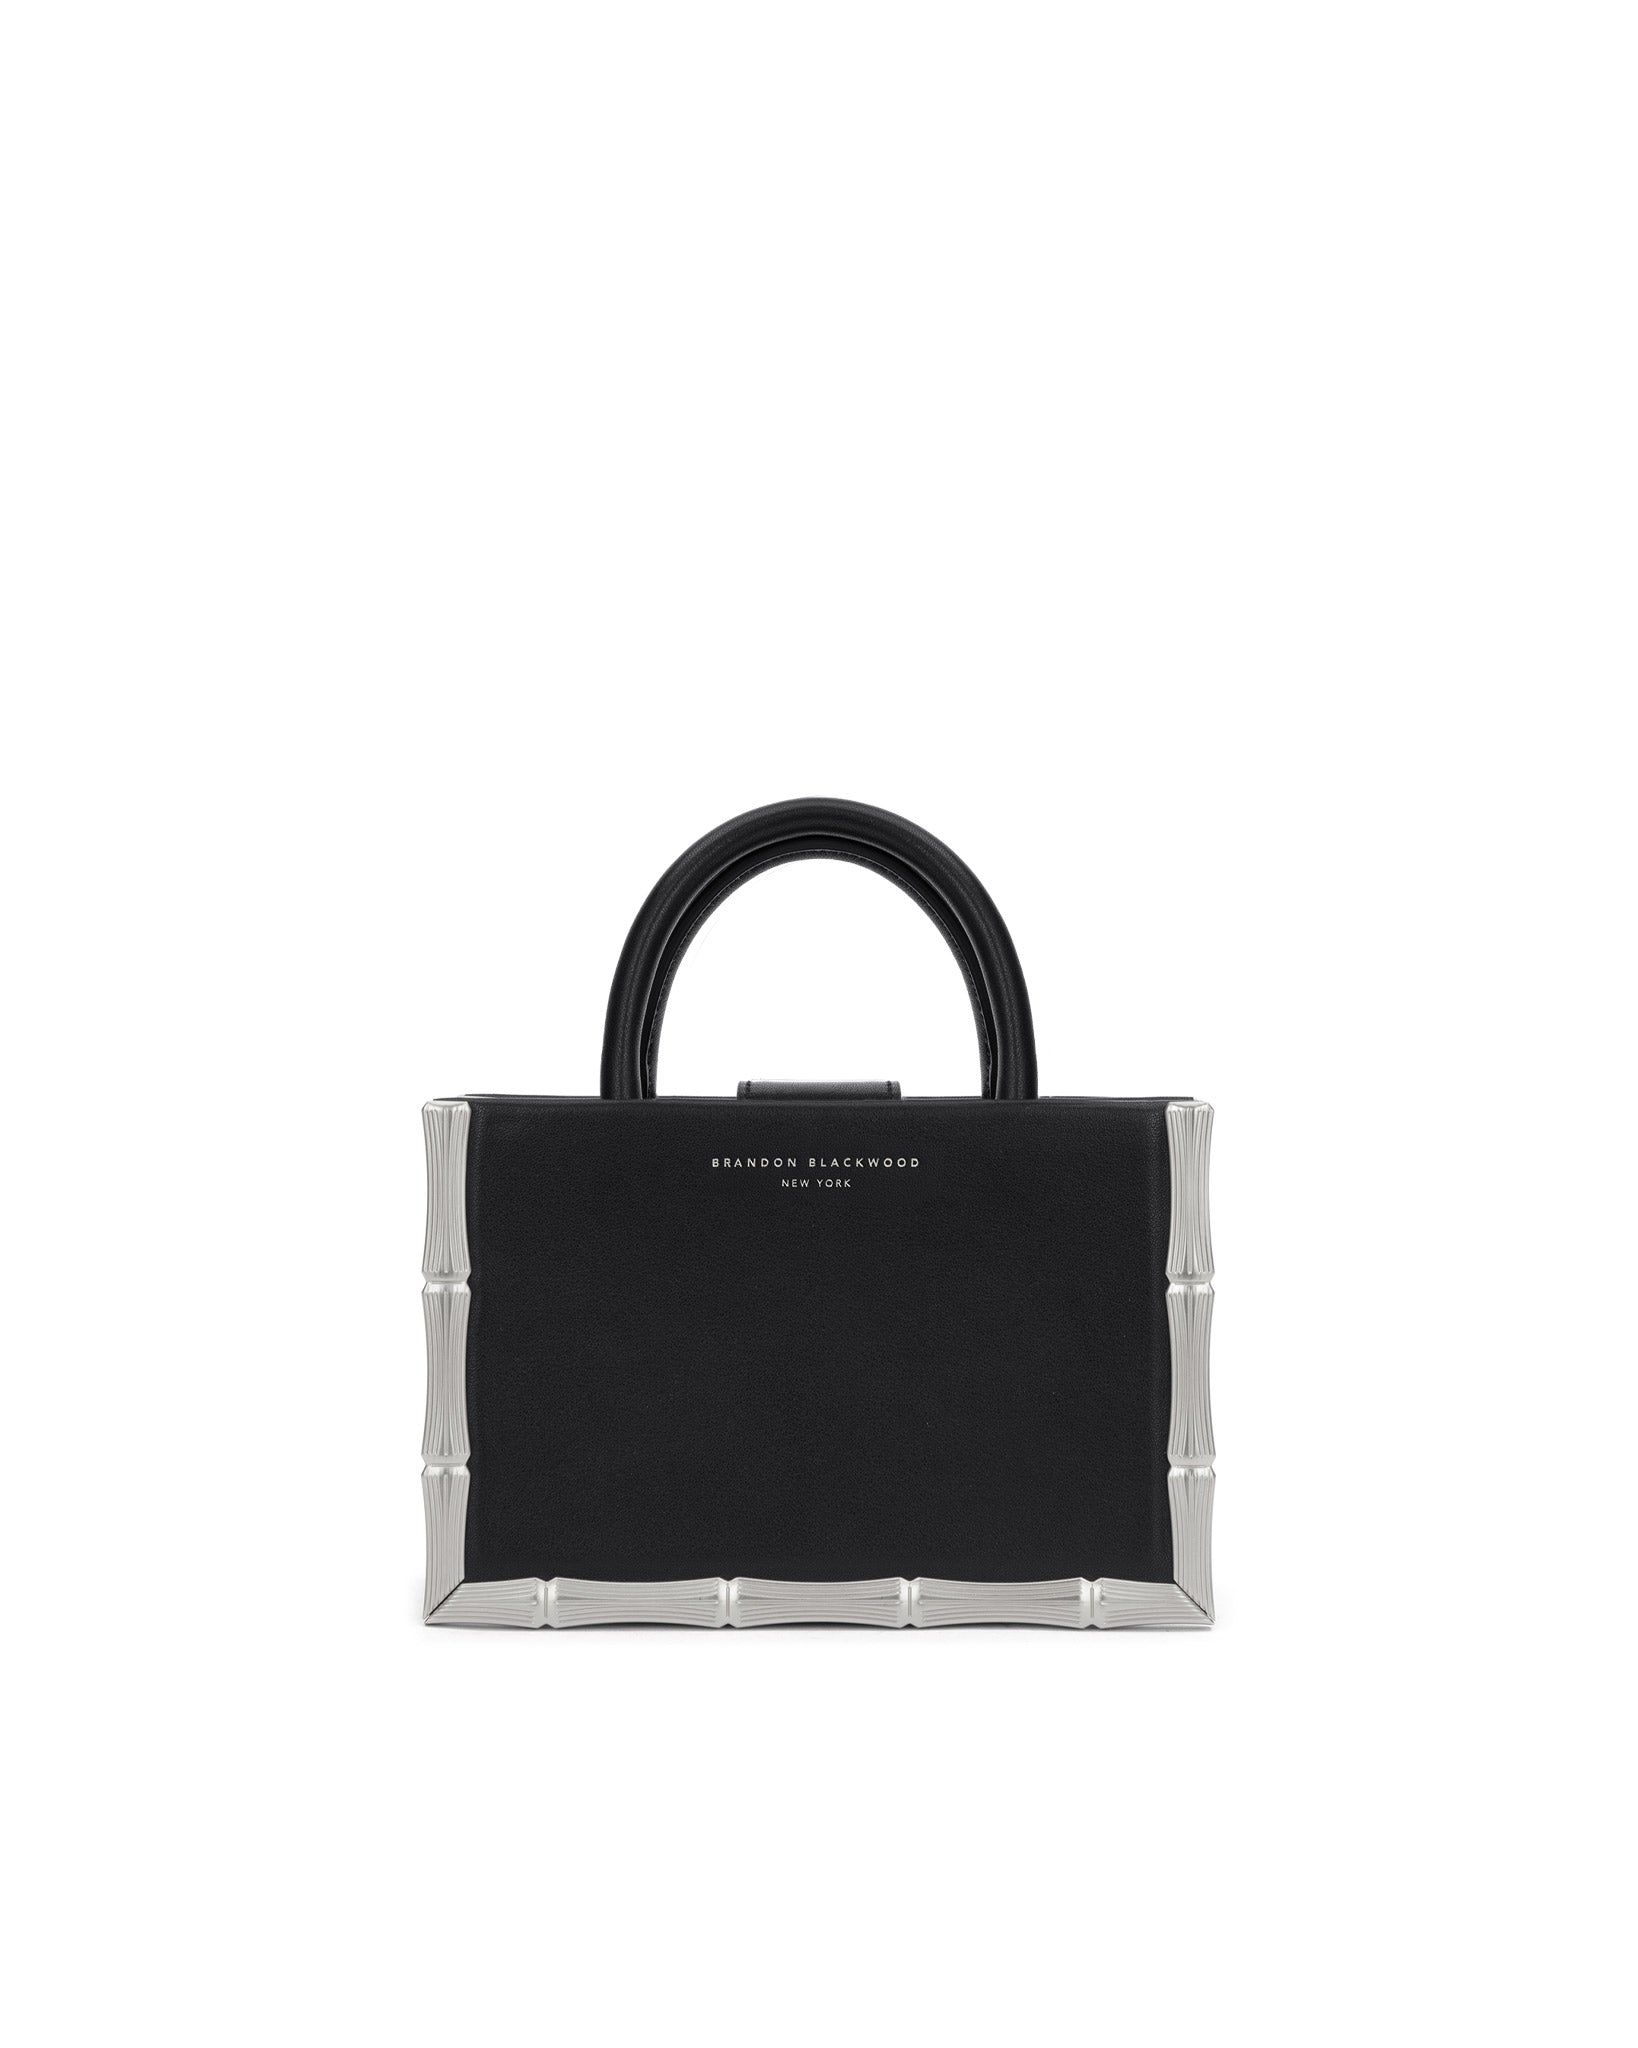 <p><strong>$280.00</strong></p><p><a href="https://brandonblackwood.com/products/bamboo-b-tote-black-leather-silver-hardware">Shop Now</a></p><p>Embellished, but not over-the-top: Brandon Blackwood’s signature boxy tote is a lesson in balance. The double handles add a ladylike quality, whether you carry it with a jeans-and-tee outfit or a slinky <a href="https://go.redirectingat.com?id=74968X1553576&url=https%3A%2F%2Fwww.harpersbazaar.com%2Ffashion%2Ftrends%2Fg41760461%2Fbest-black-tie-wedding-guest-dresses%2F&sref=https%3A%2F%2Fwww.veranda.com%2Fluxury-lifestyle%2Fluxury-fashion-jewelry%2Fg46245229%2Fbest-designer-tote-bags%2F">black-tie gown</a>. There’s also a removable strap for easy crossbody carrying.</p><p><strong>Colors: </strong>Black/silver, black/gold</p><p><strong>Materials:</strong> Leather, hardware</p>